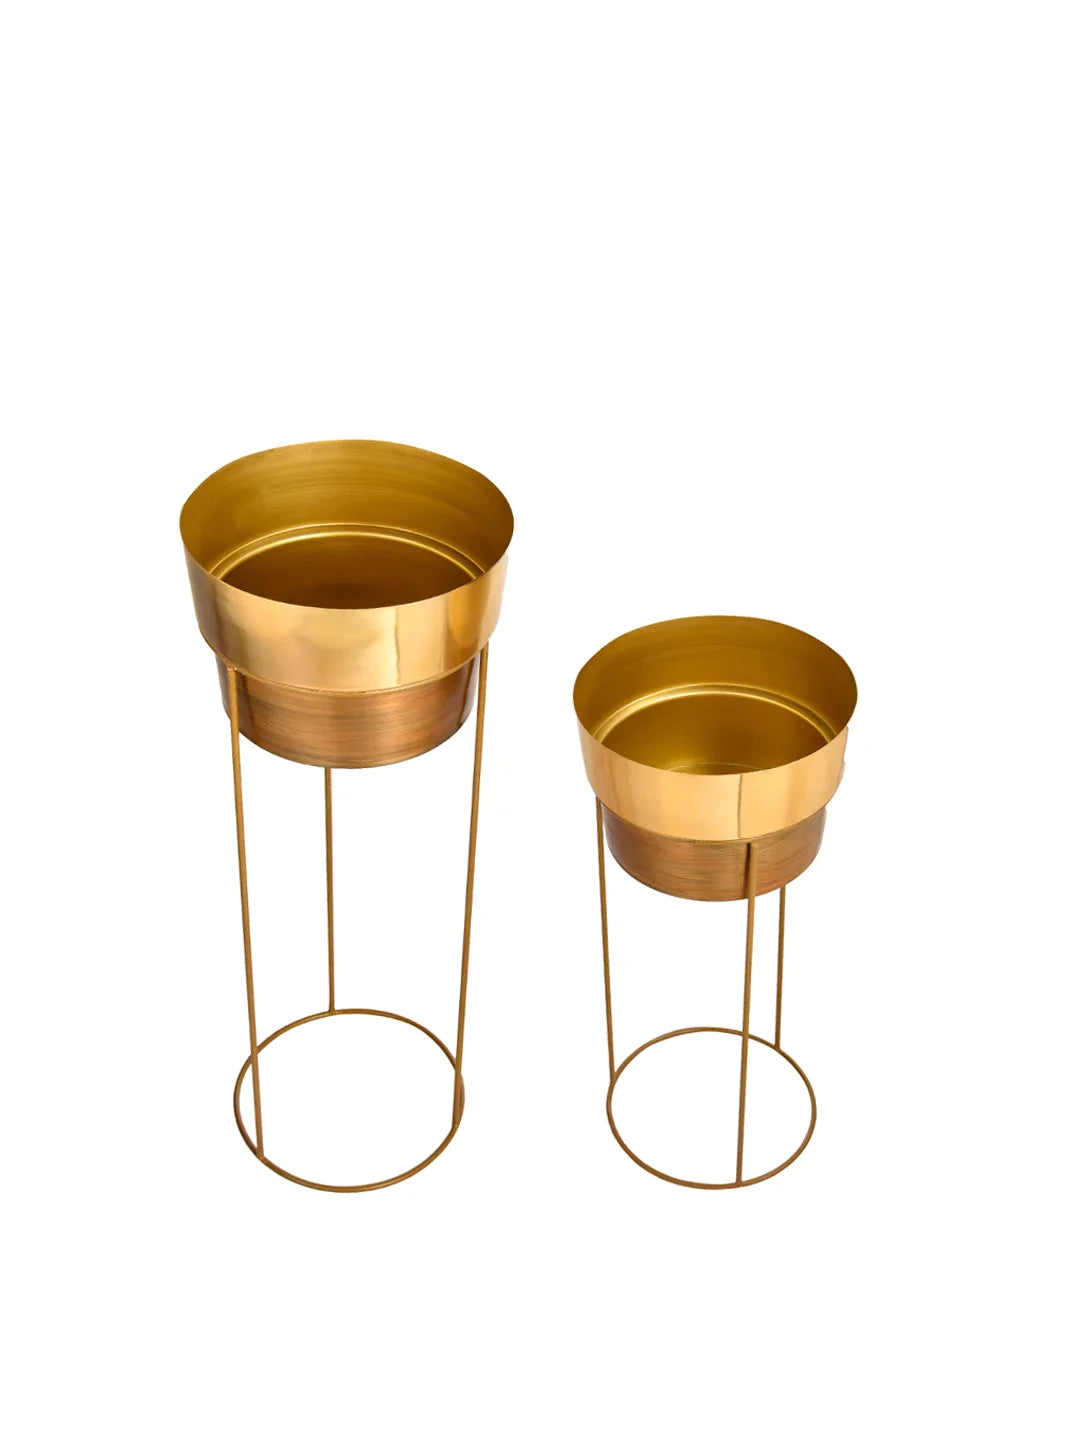 Set of Two Golden Planters